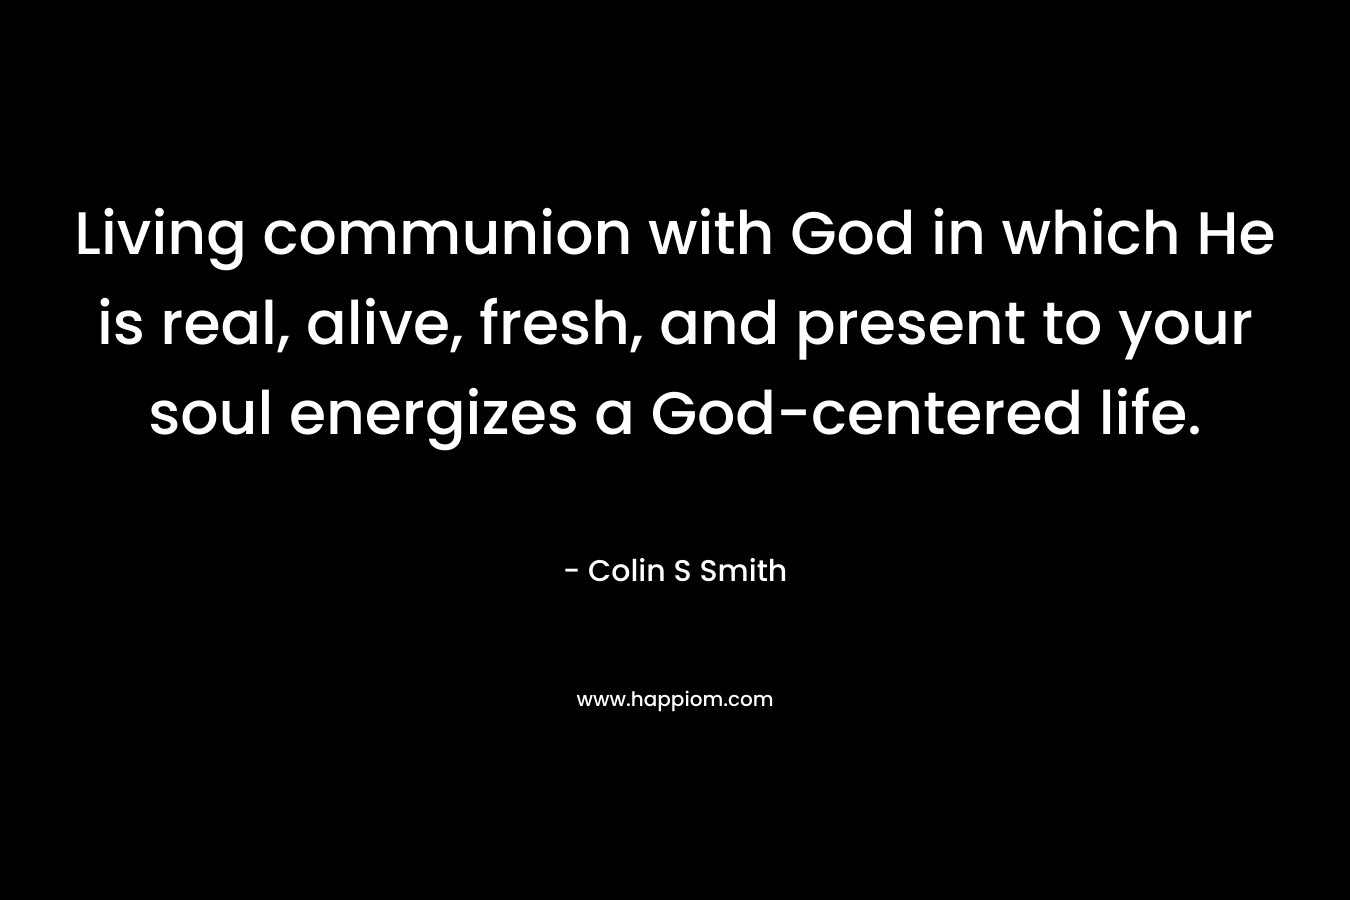 Living communion with God in which He is real, alive, fresh, and present to your soul energizes a God-centered life.